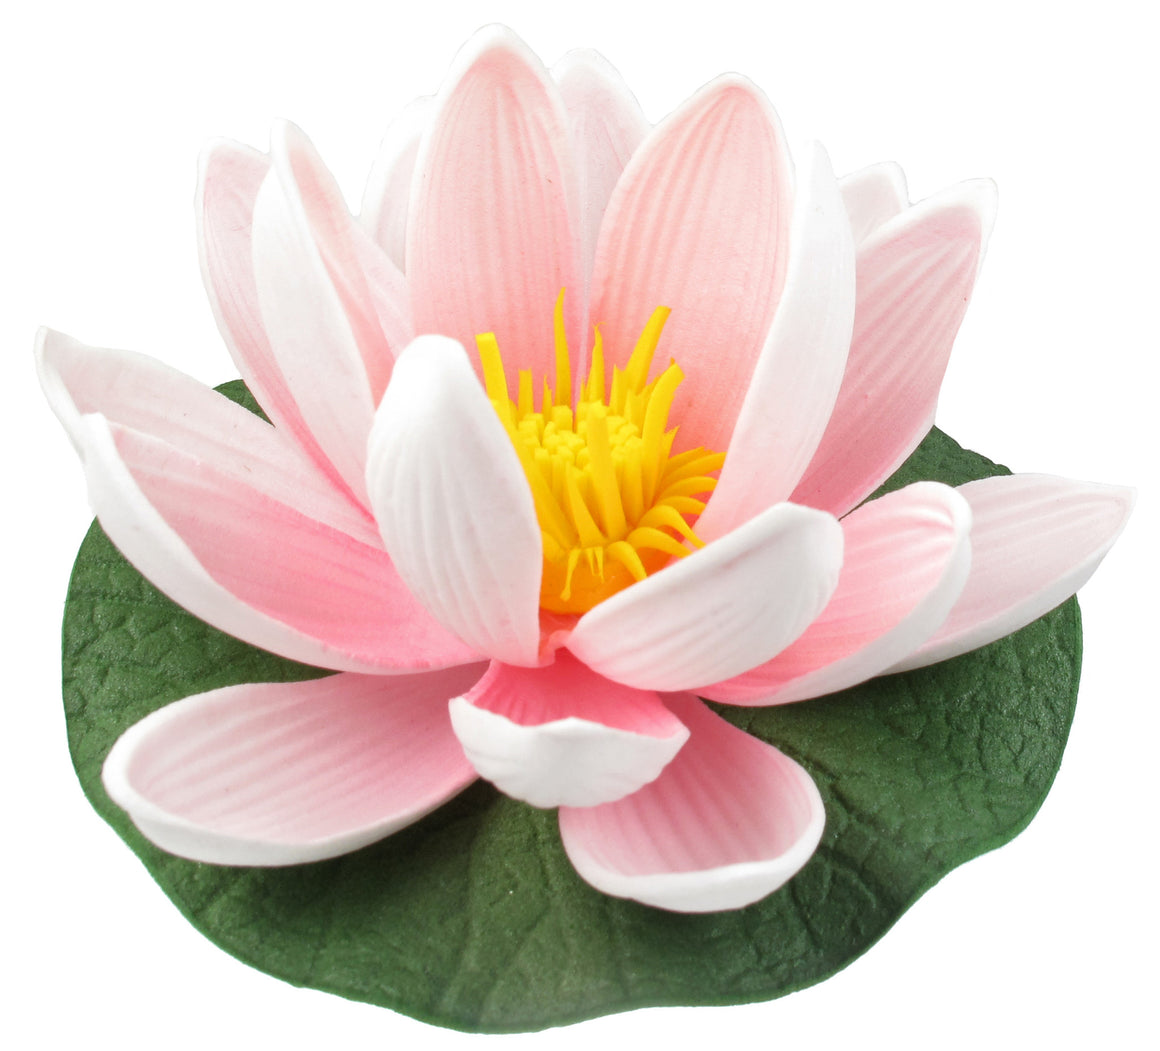 Small Floating Foam Water Lily Flower, For Small Water Feature, Approx. 3.25" x 3.25" x 2", Light Pink - TropicaZona